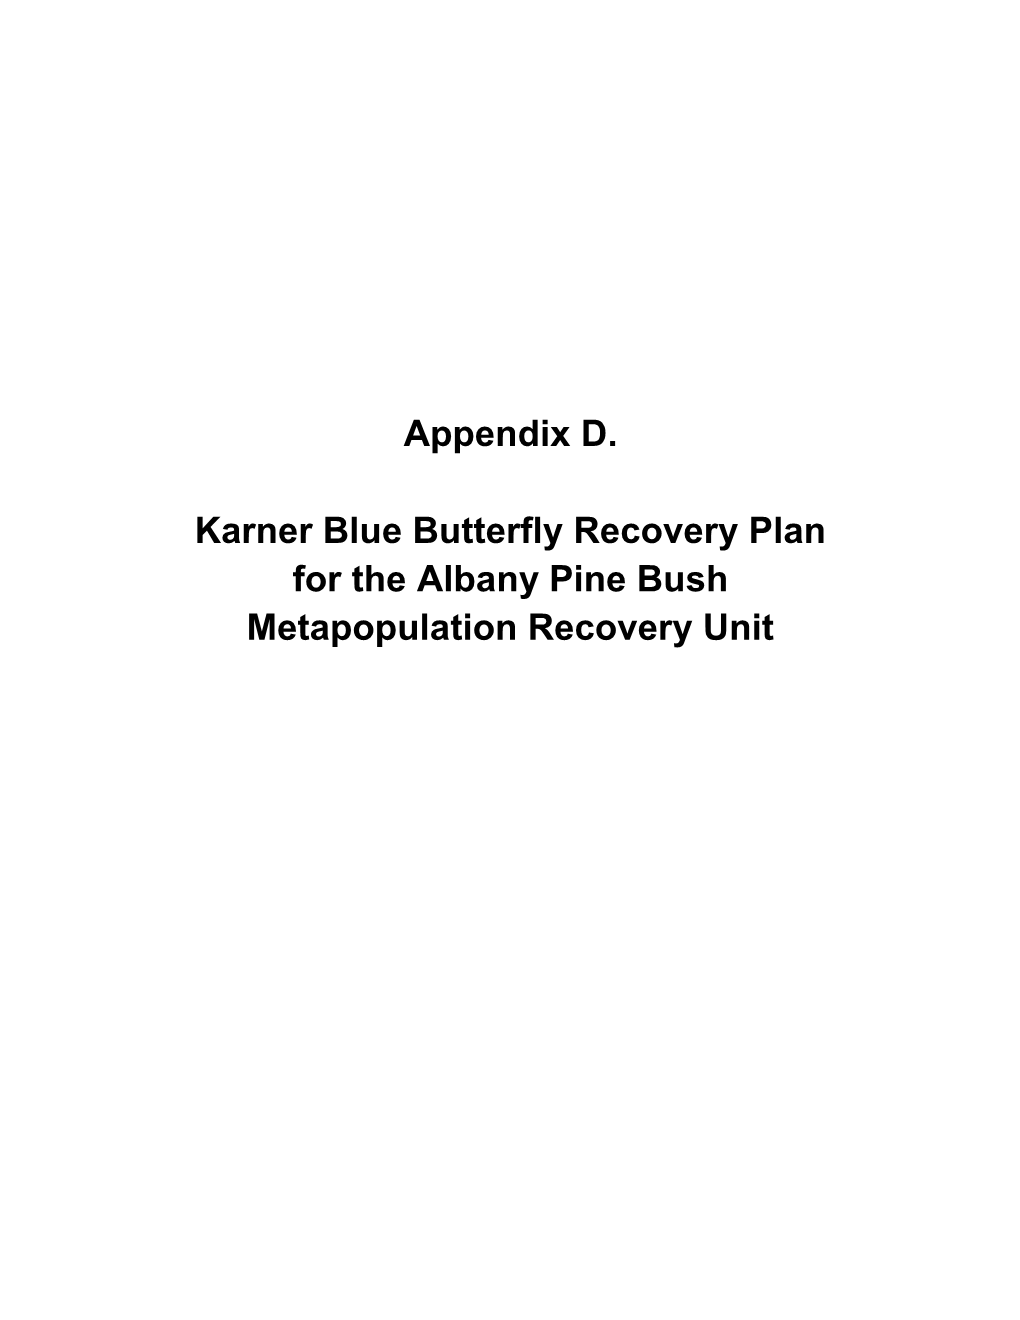 Appendix D. Karner Blue Butterfly Recovery Plan for the Albany Pine